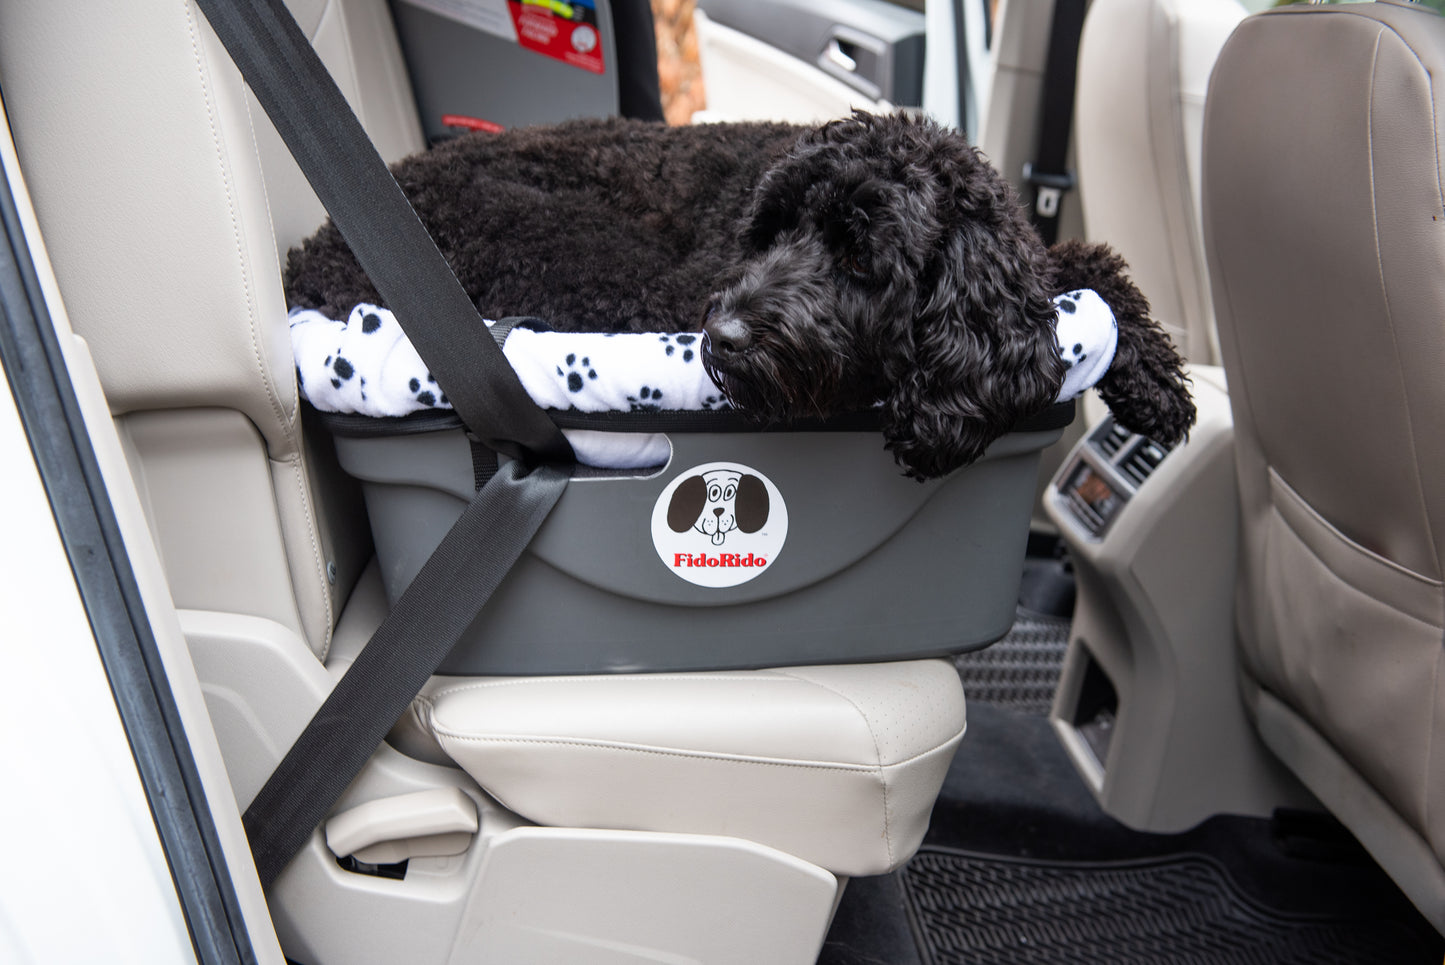 Black mini doodle dog resting comfortably with head on paw in Fido Pet Products' FidoRido pet car seat with black paw prints on white fleece covered seat installed in back seat of car with beige interior and grey seat belt.